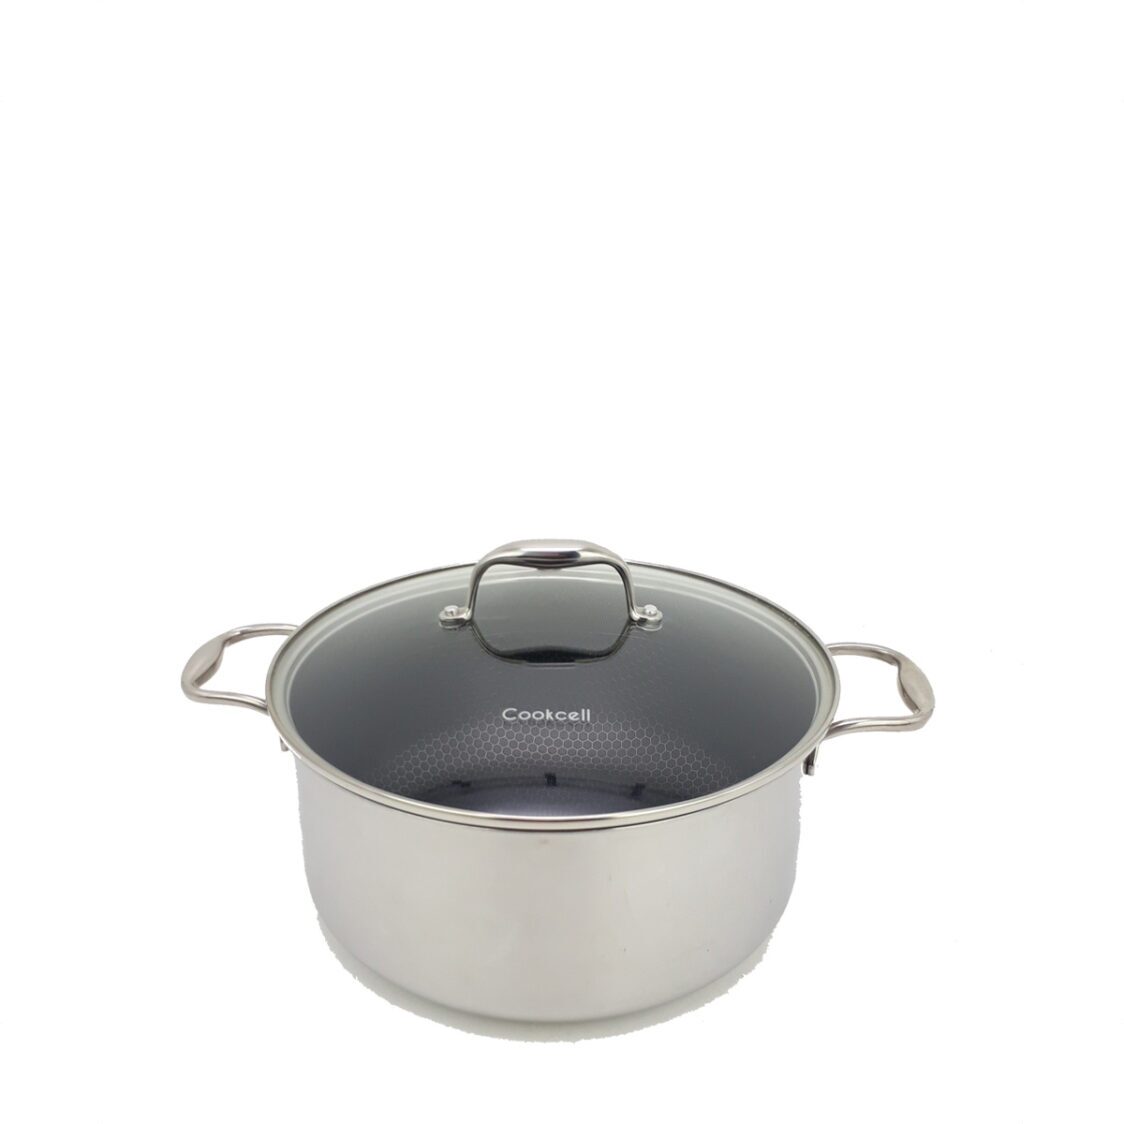 Cookcell Blackcube 28cm Stock Pot with Glass Lid